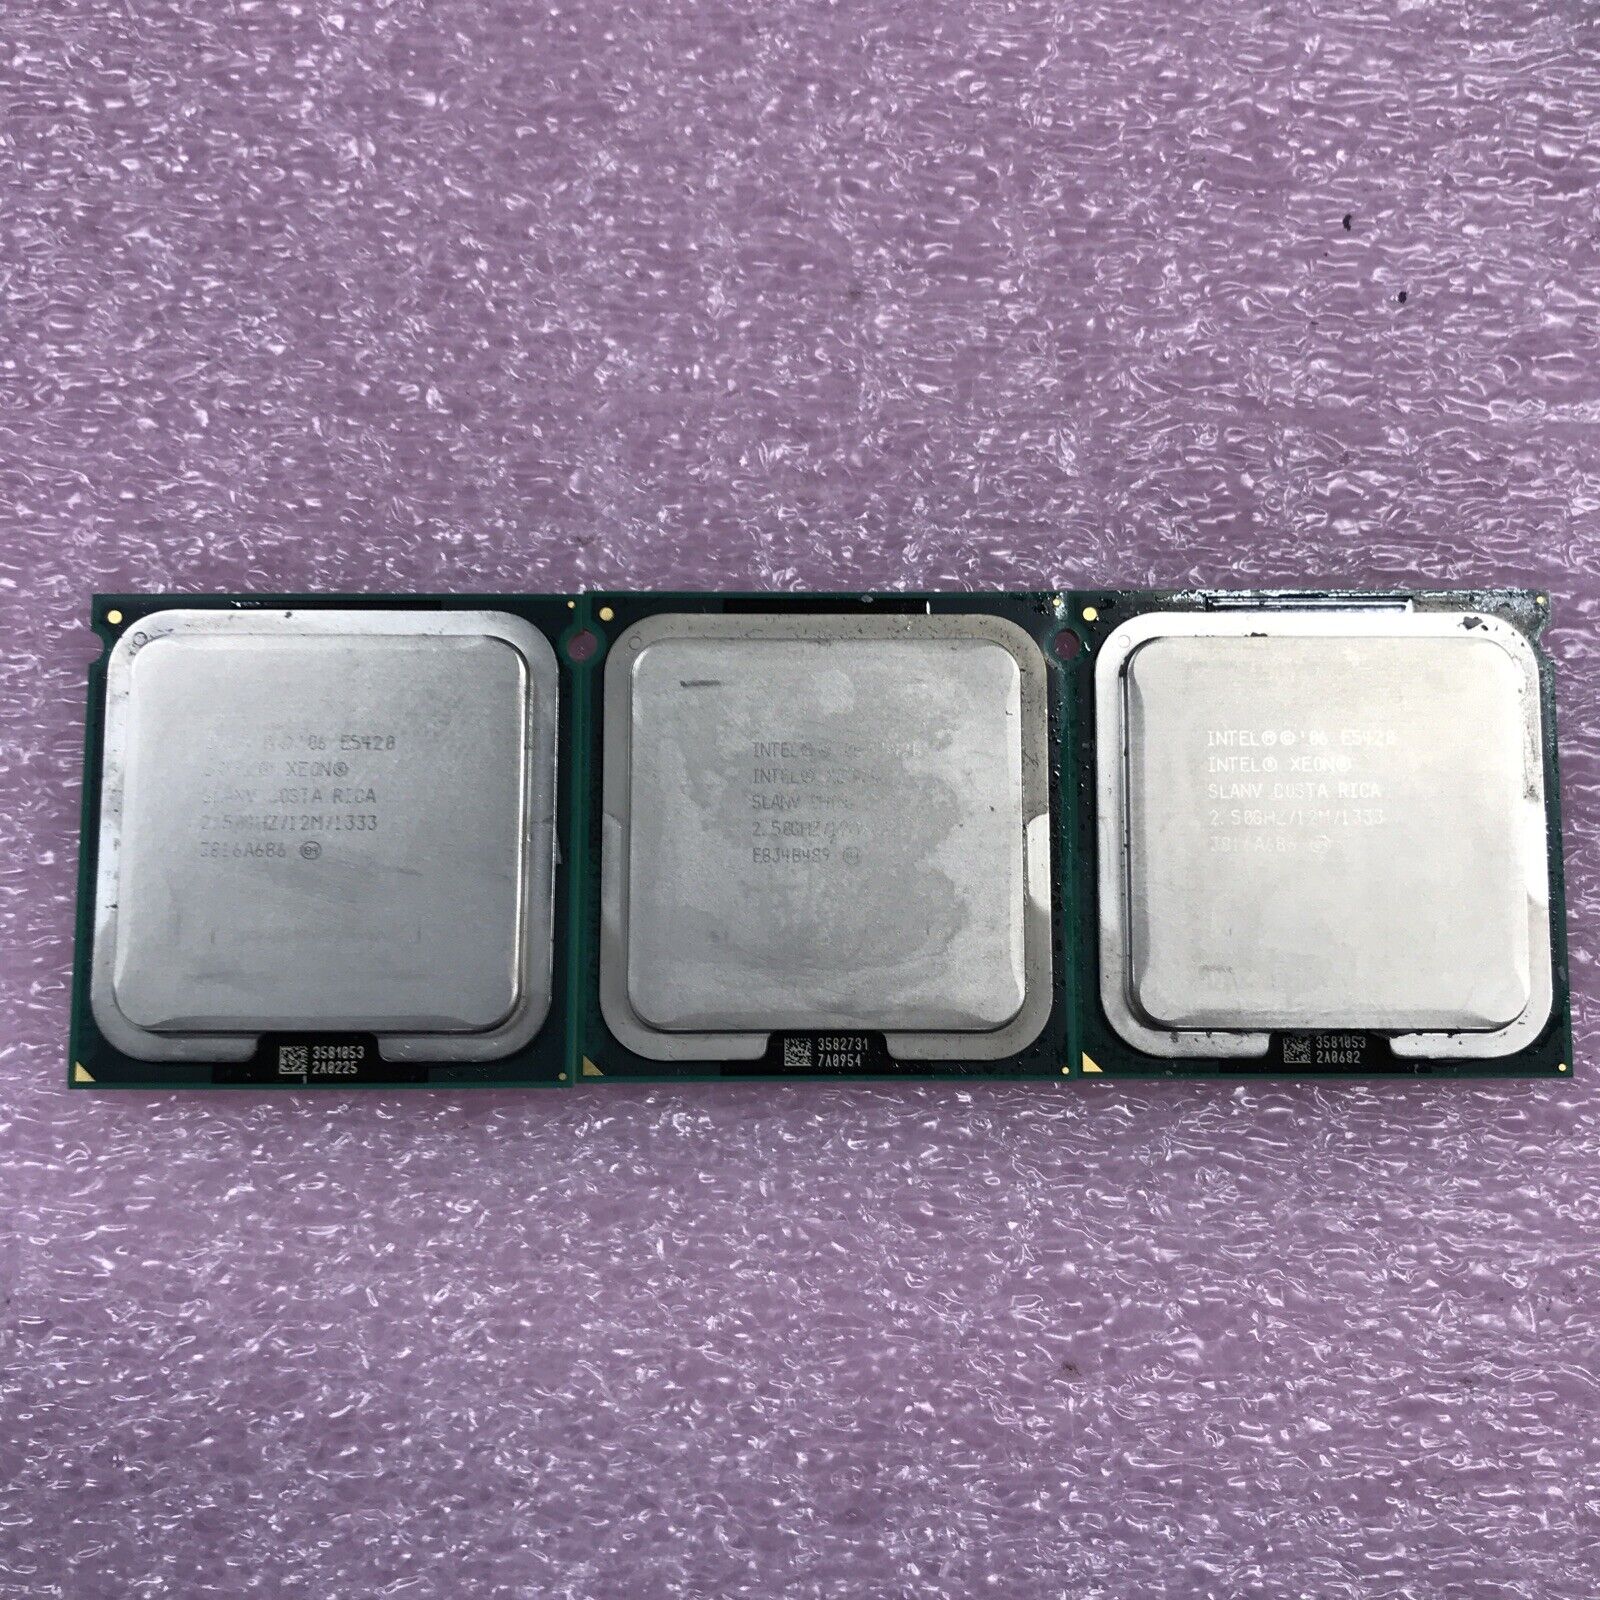 (Lot of 3) Intel E5420 Intel Xeon SLANV 2.5GHz (Tested and Working)